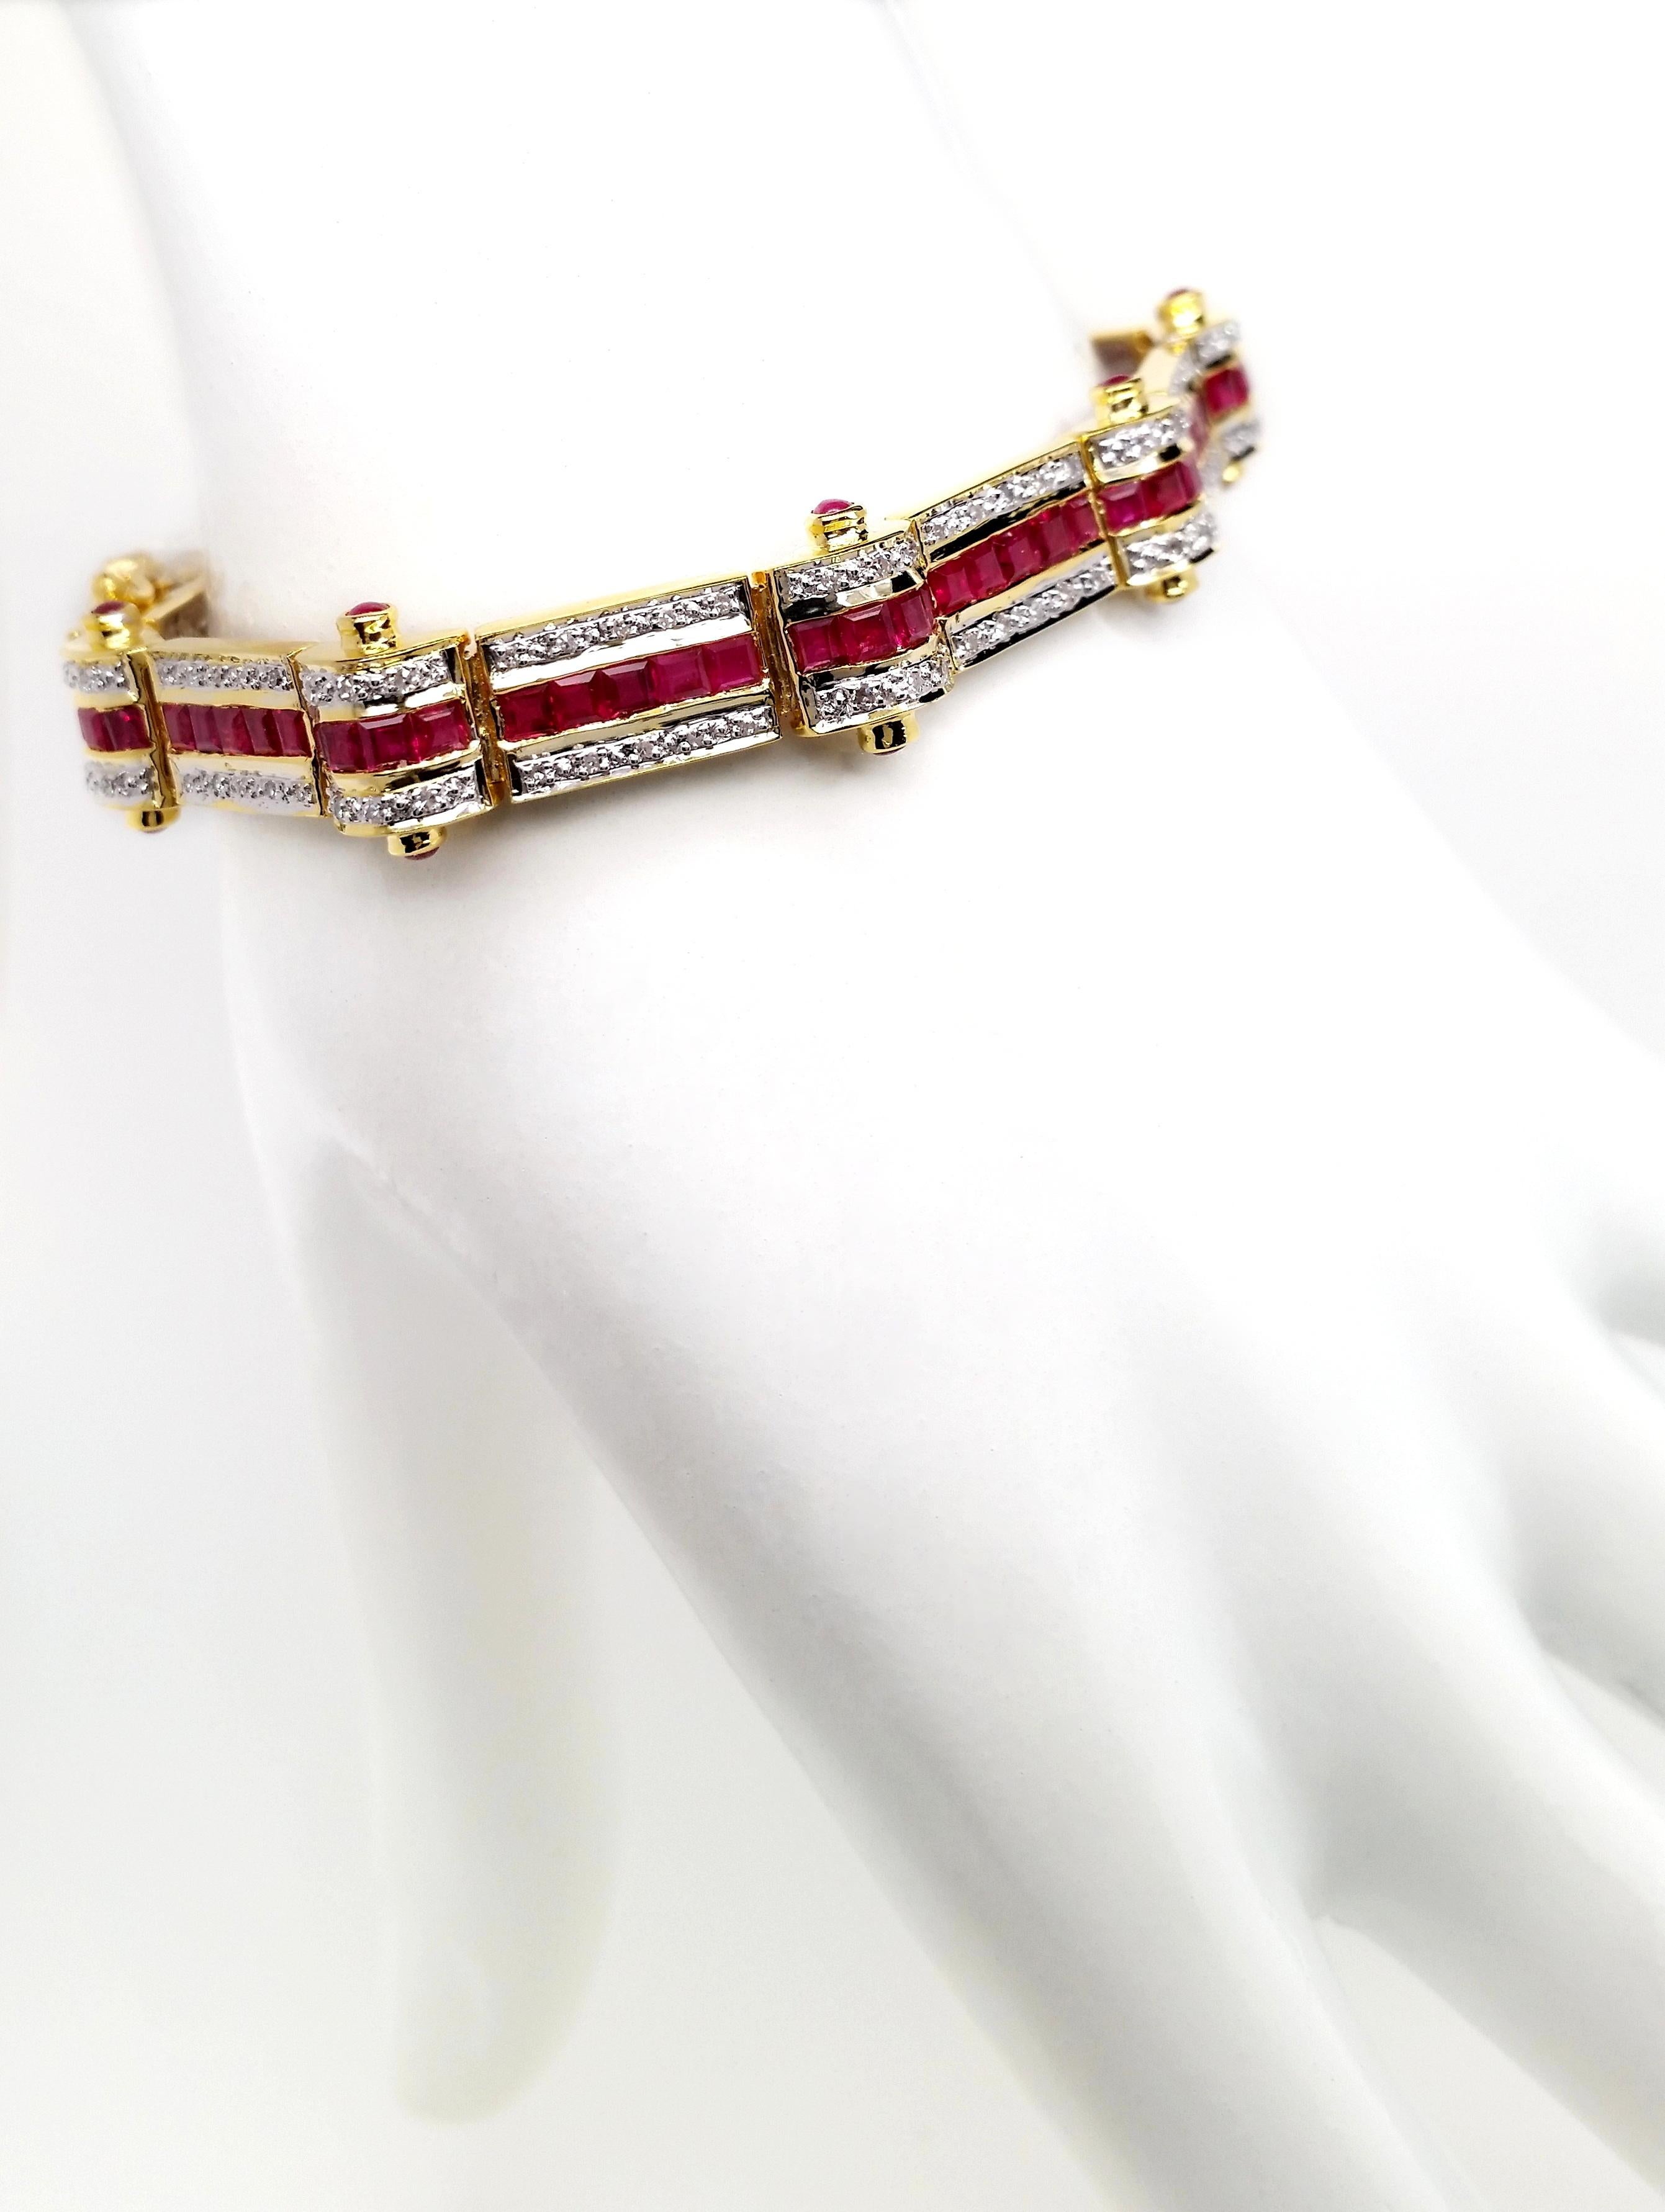 This chic bracelet, from the house of Top Crown Jewelry collection, is a unique piece of jewelry inspired by the delicate intricacy of a traditional.
The center stones are a charming natural intense purplish-red color rubies, accented by 100%